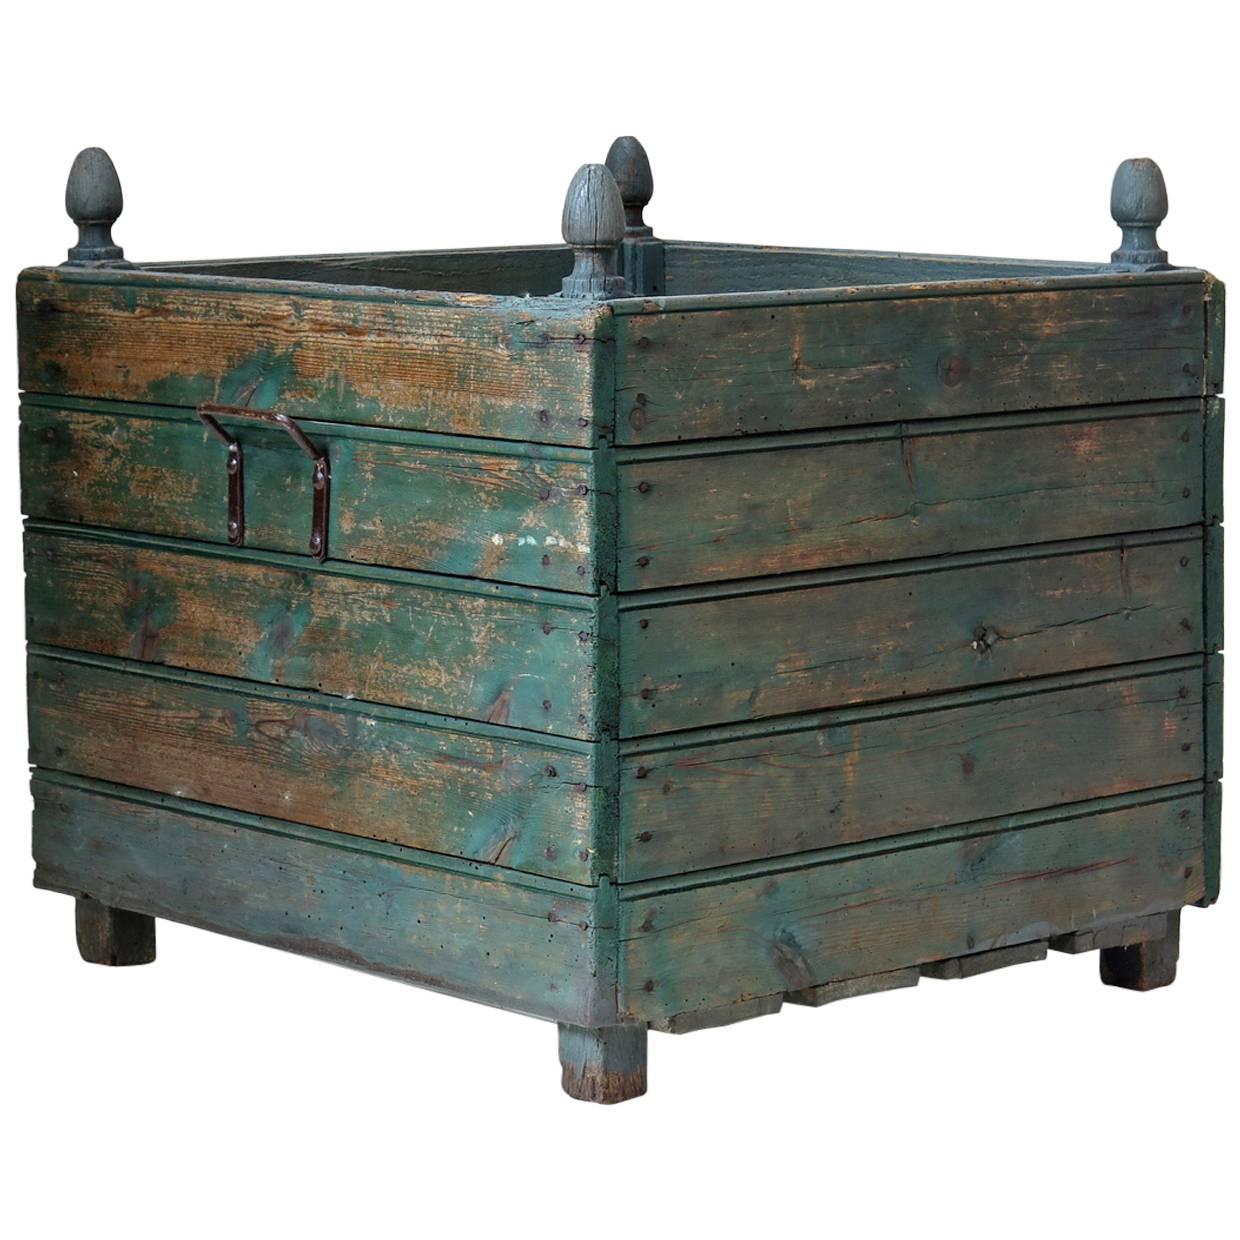 Elegant pair of large square wooden box planters, painted green with finials at each corner.